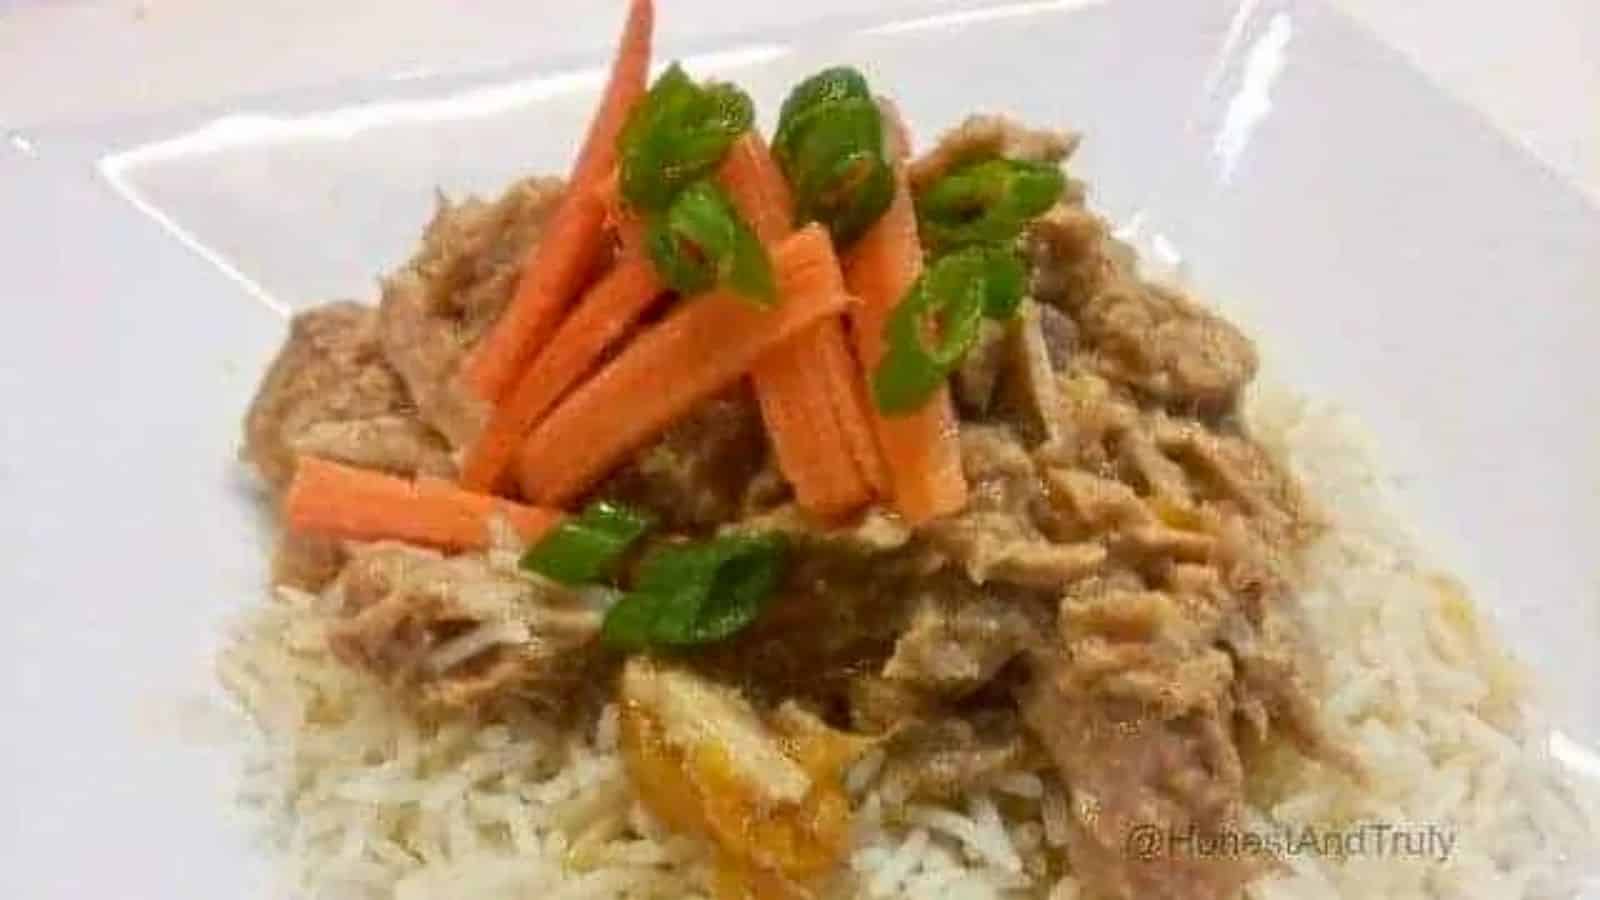 Image shows Slow Cooker Thai Pork on a bed of rice on a white plate with sliced carrots and green onion on top of it.